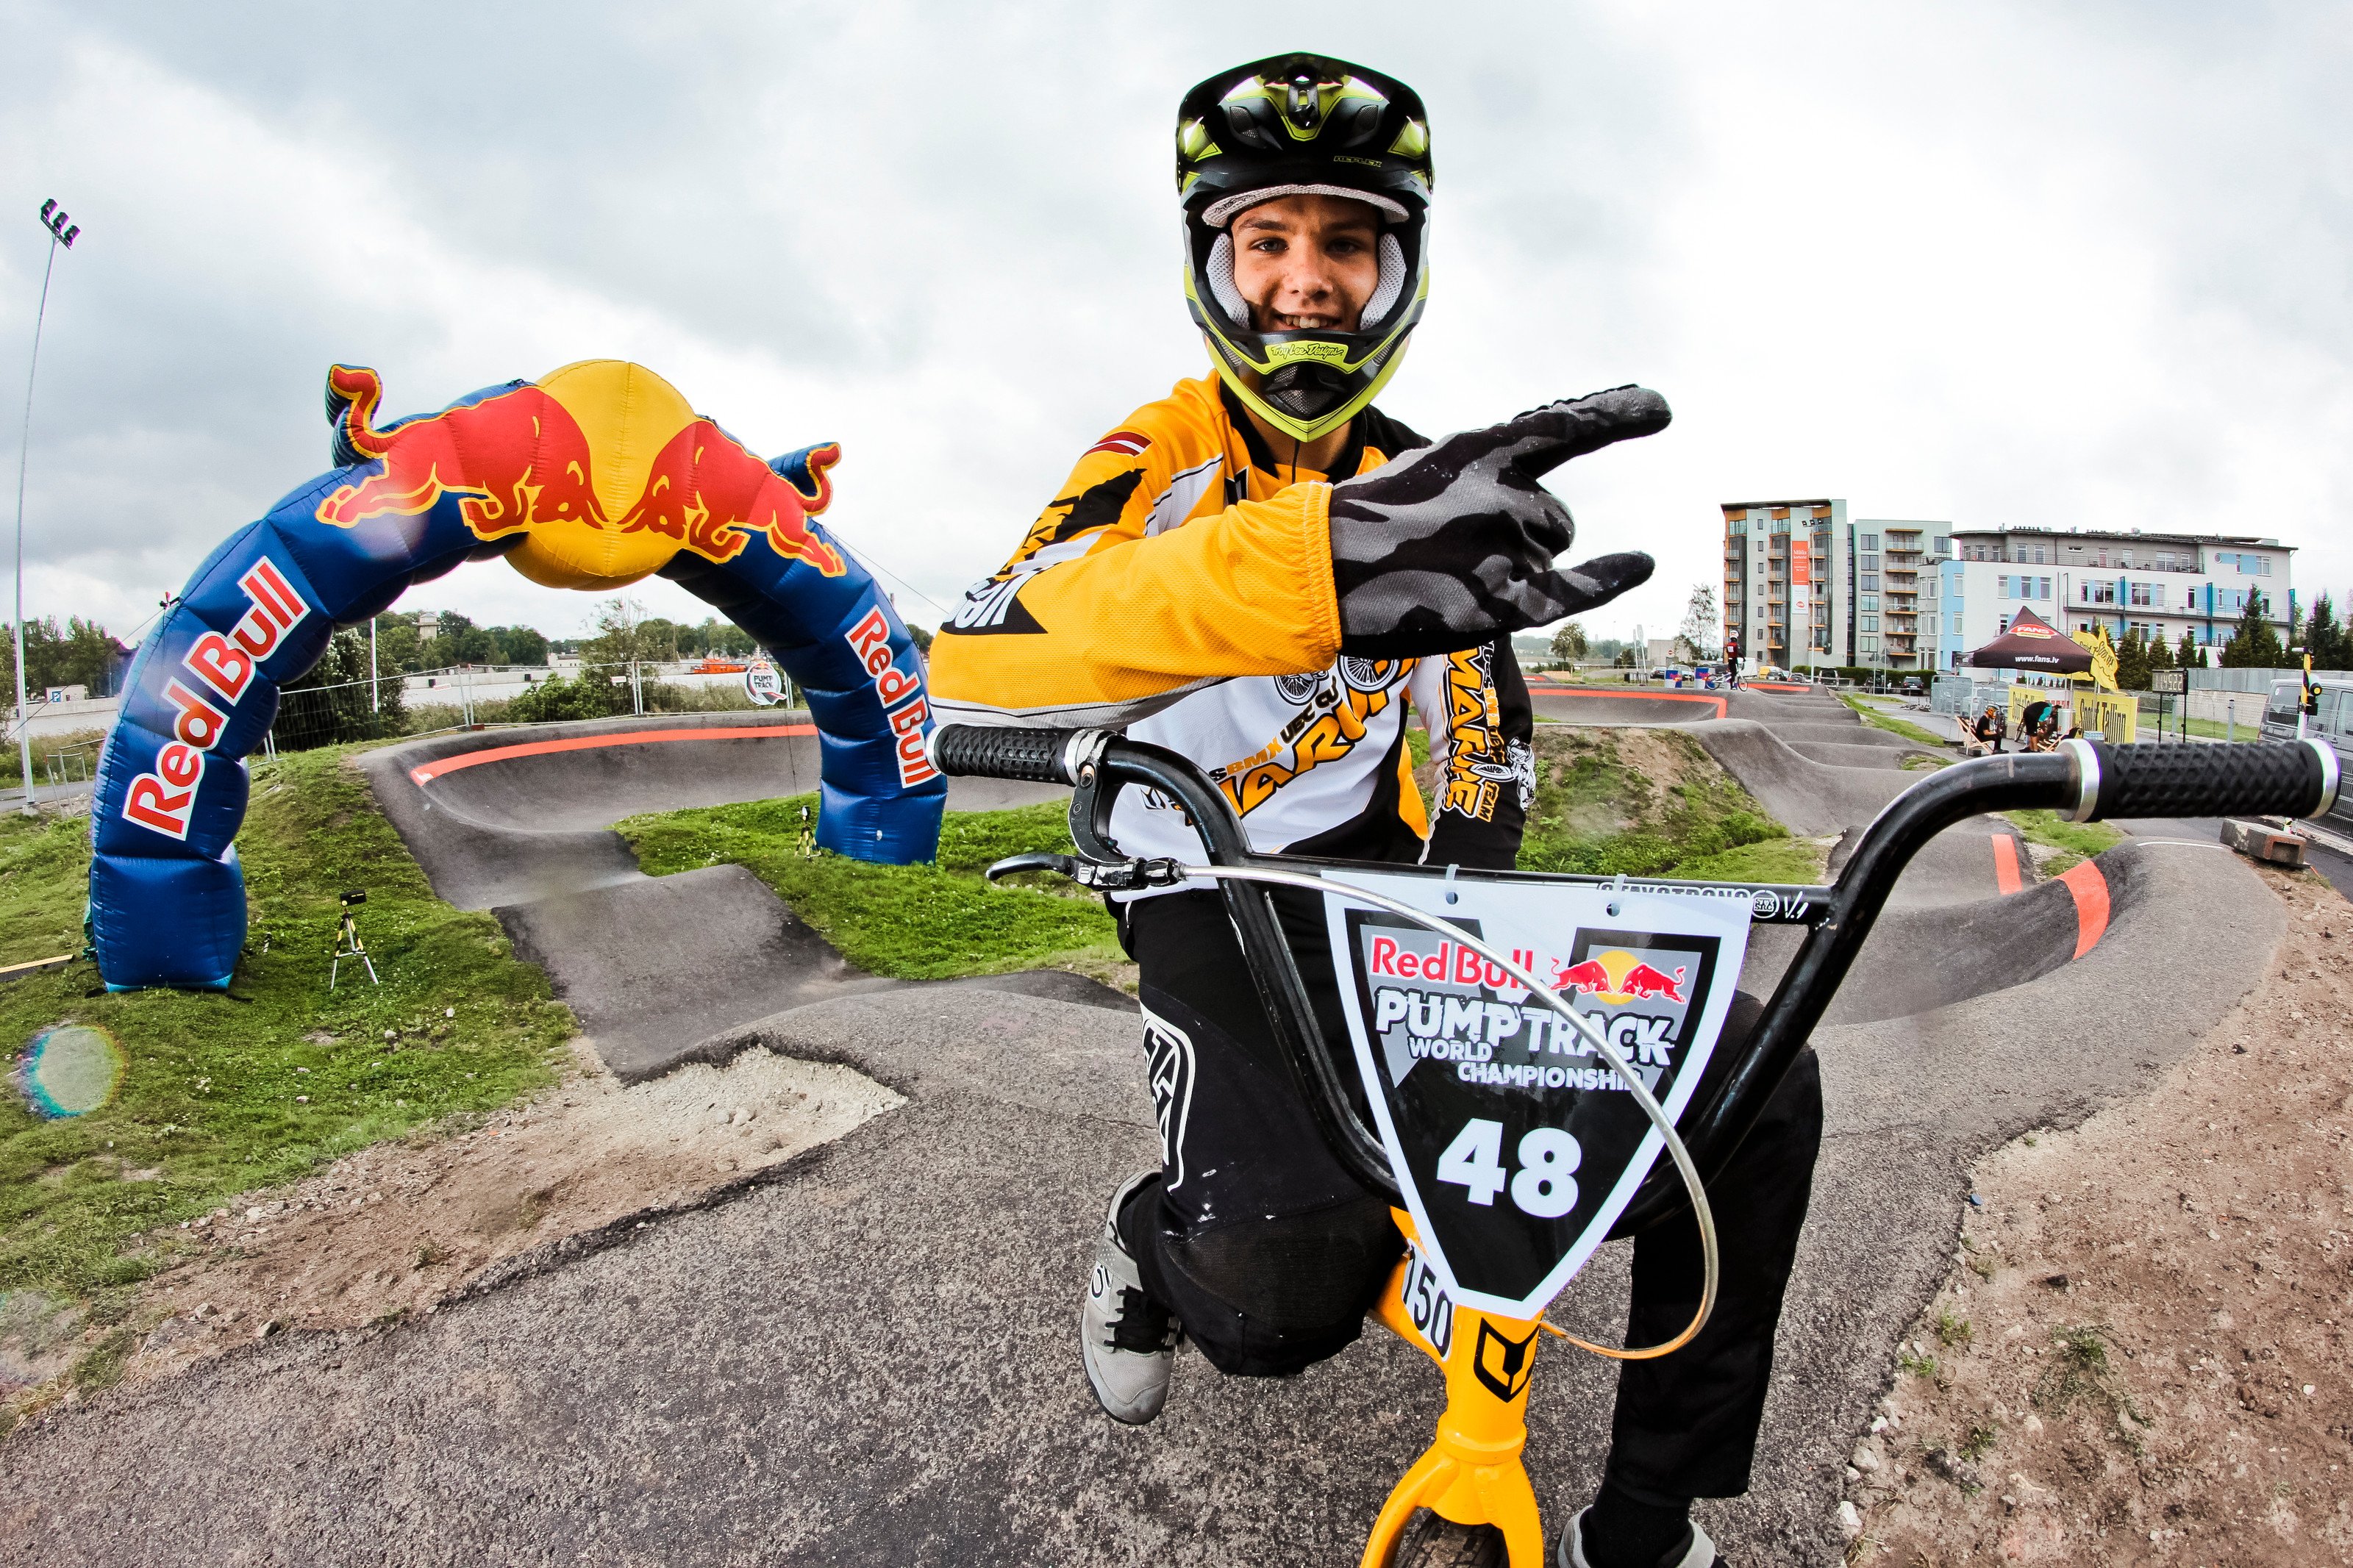 Kaspars Alksnis / Red Bull Content Pool